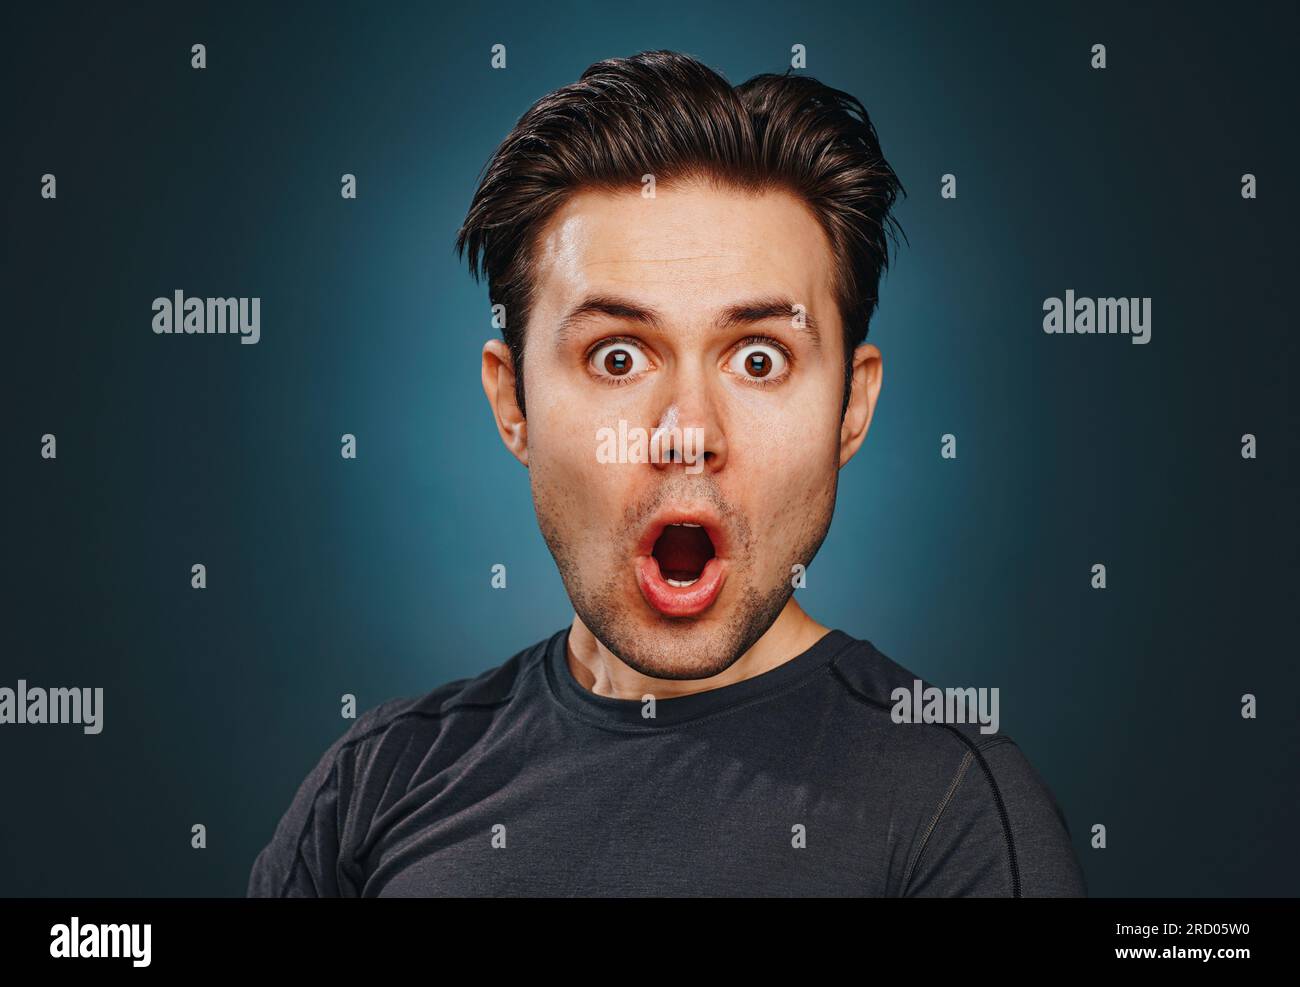 Young man with funny big head emotional wow portrait Stock Photo